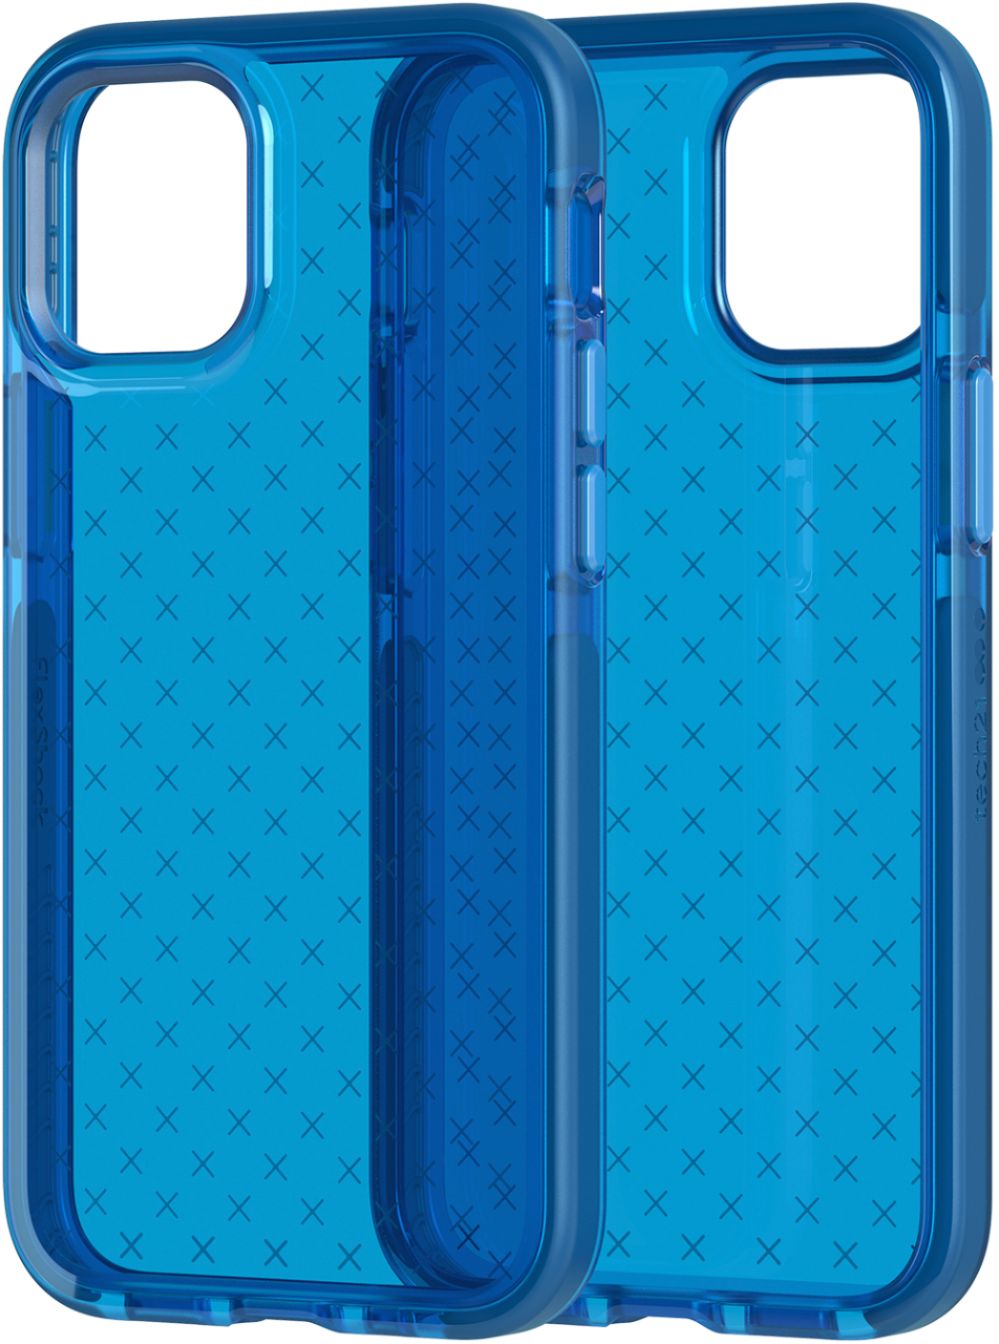 Tech21 Evo Check Case For Apple Iphone 12 Mini Classic Blue bbr Best Buy